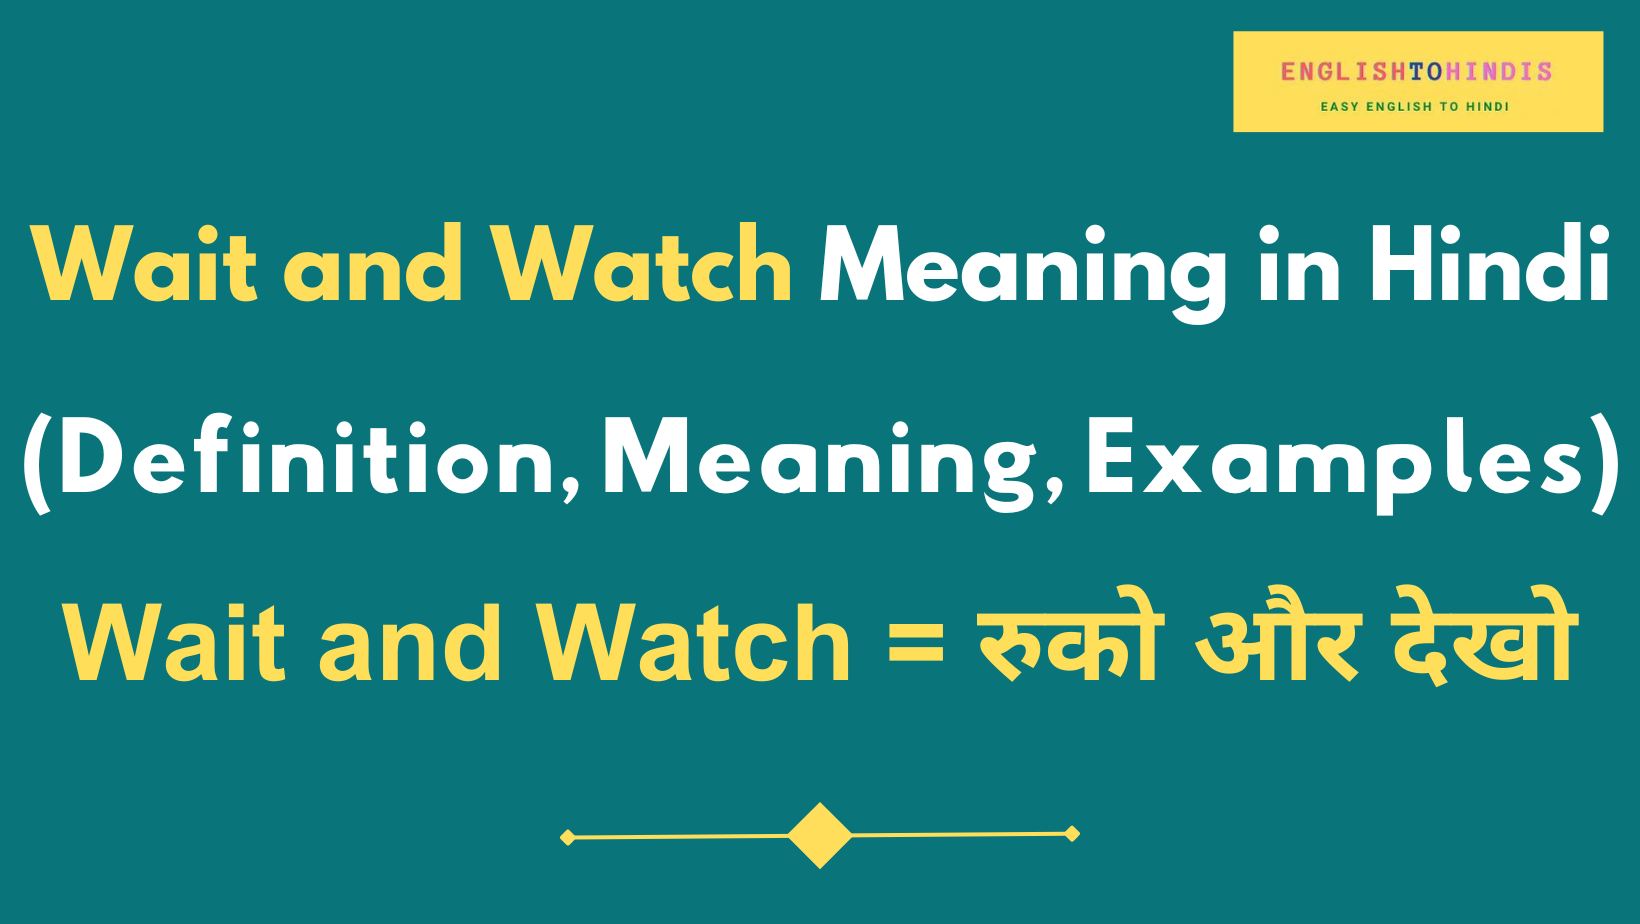 Wait and Watch Meaning in Hindi